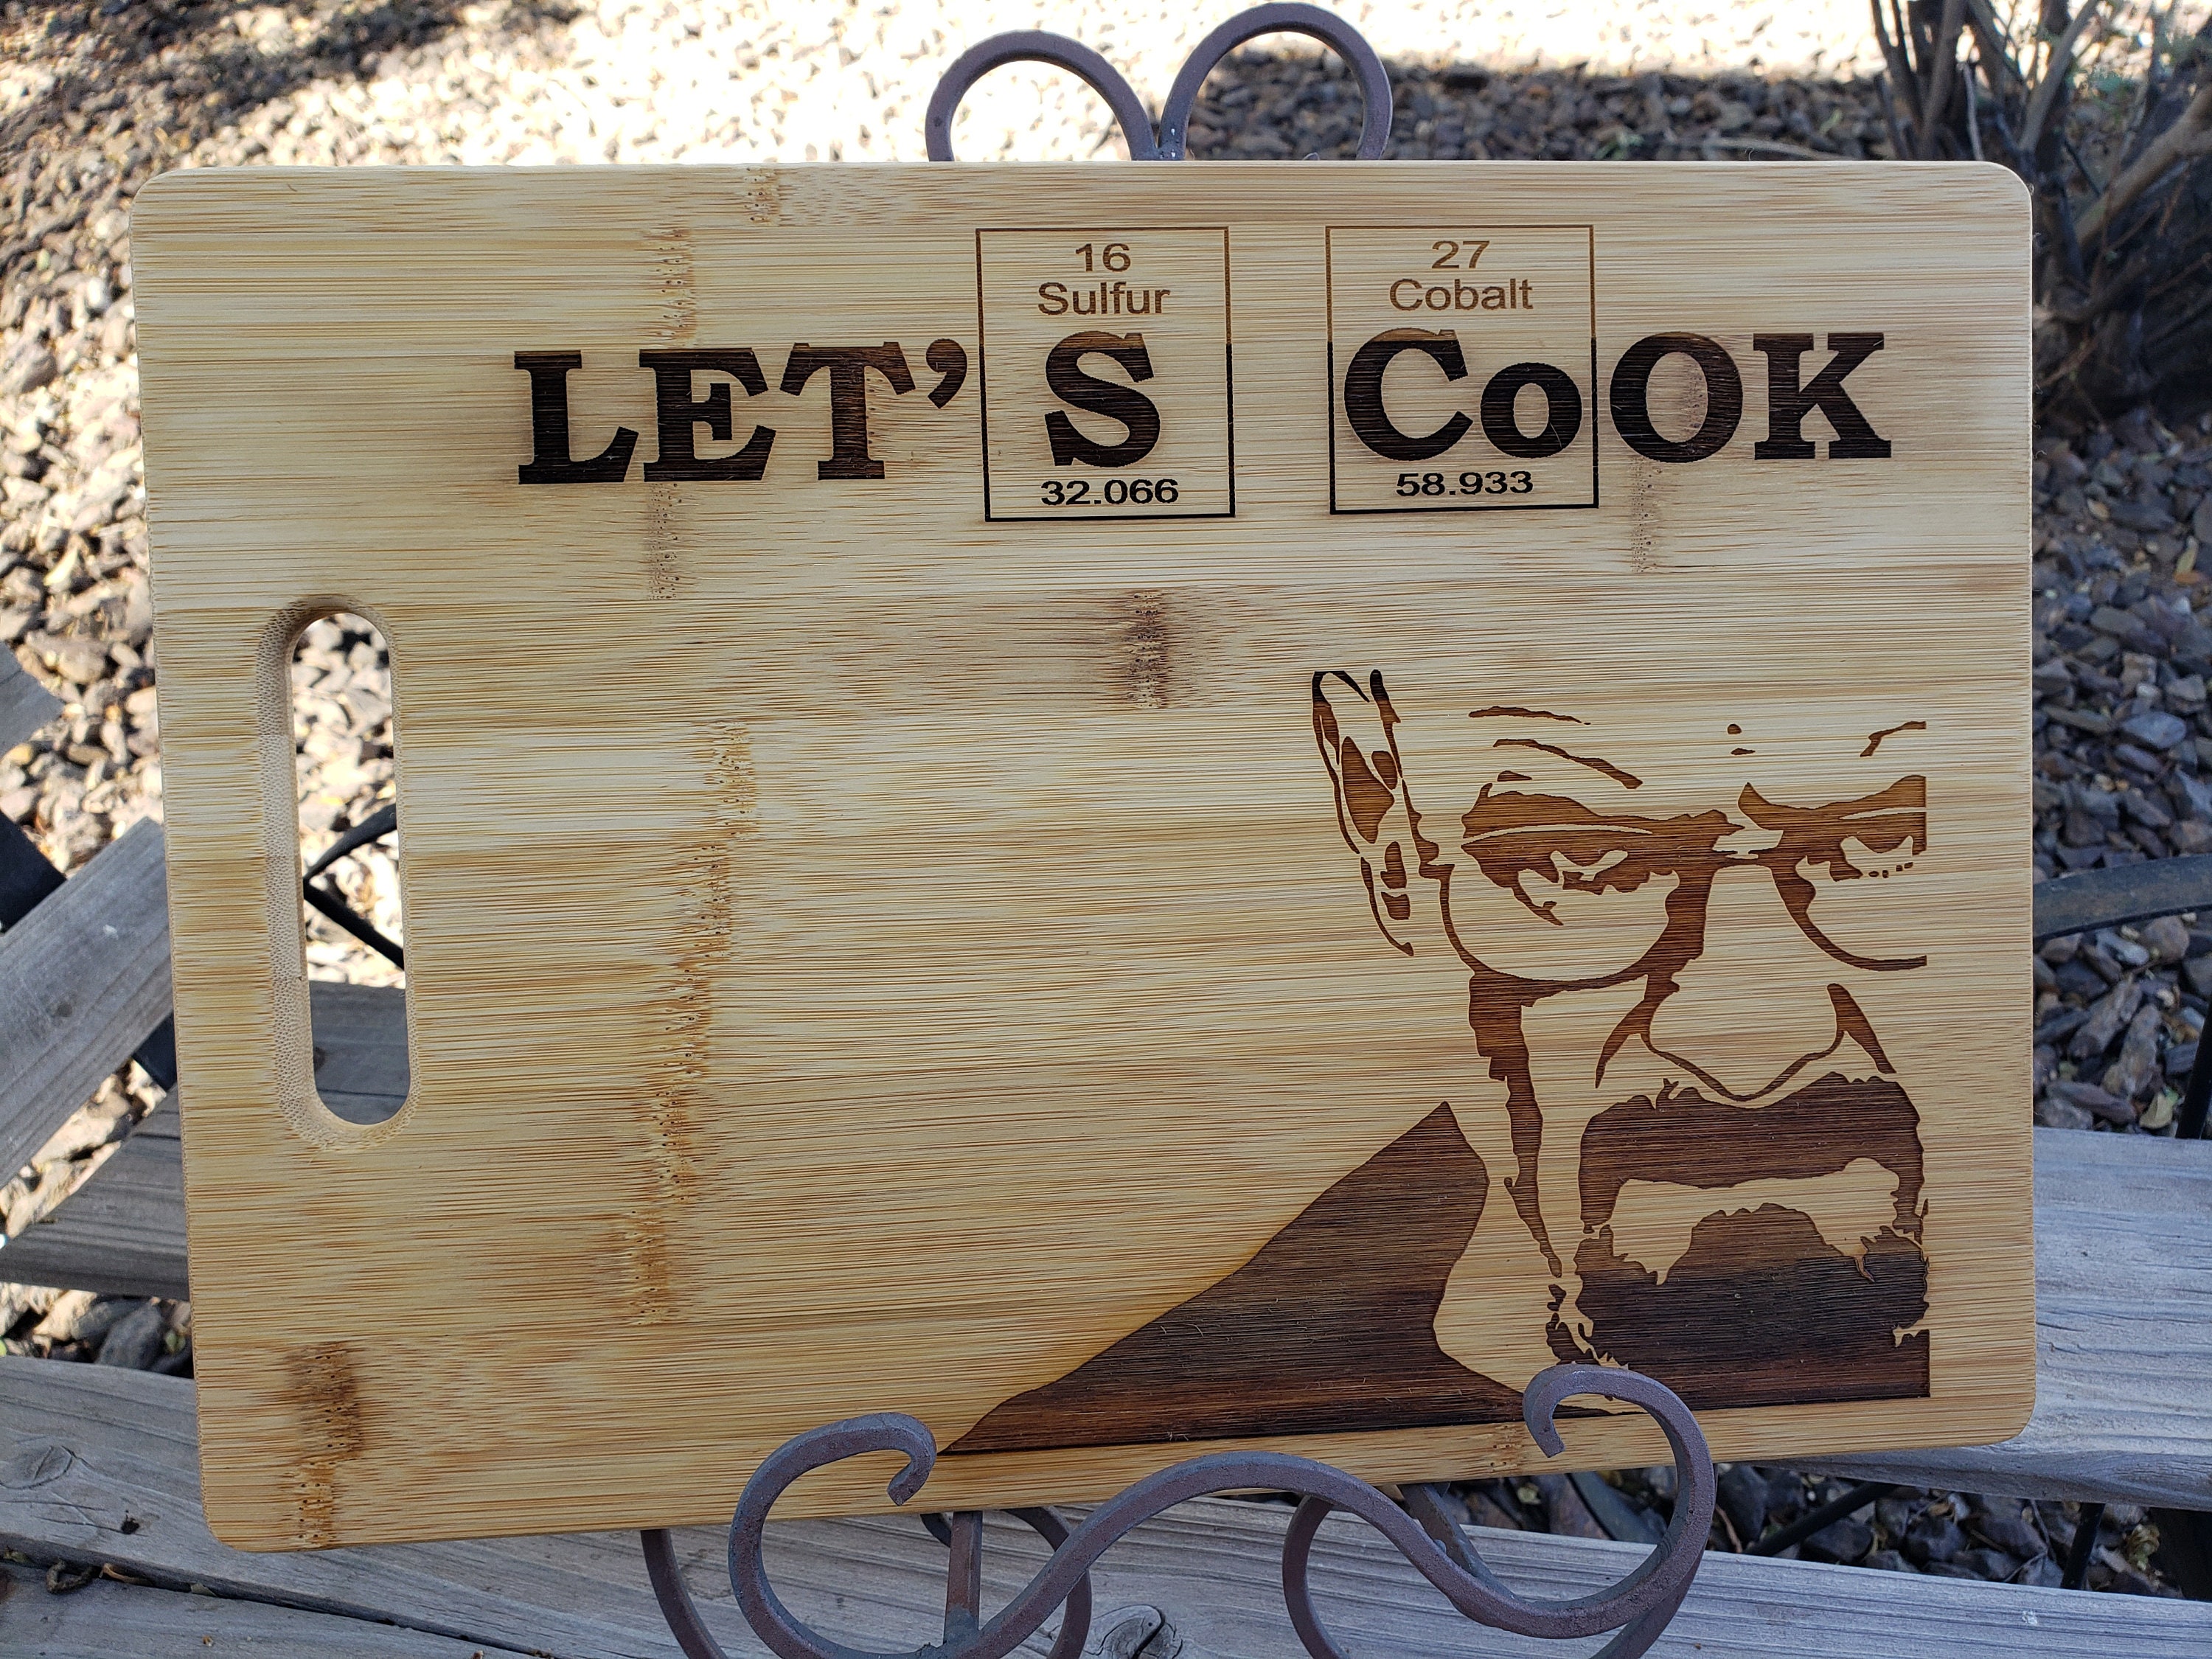 Breaking Bad Let's Cook Spoon Rest - LennyMudWholesale